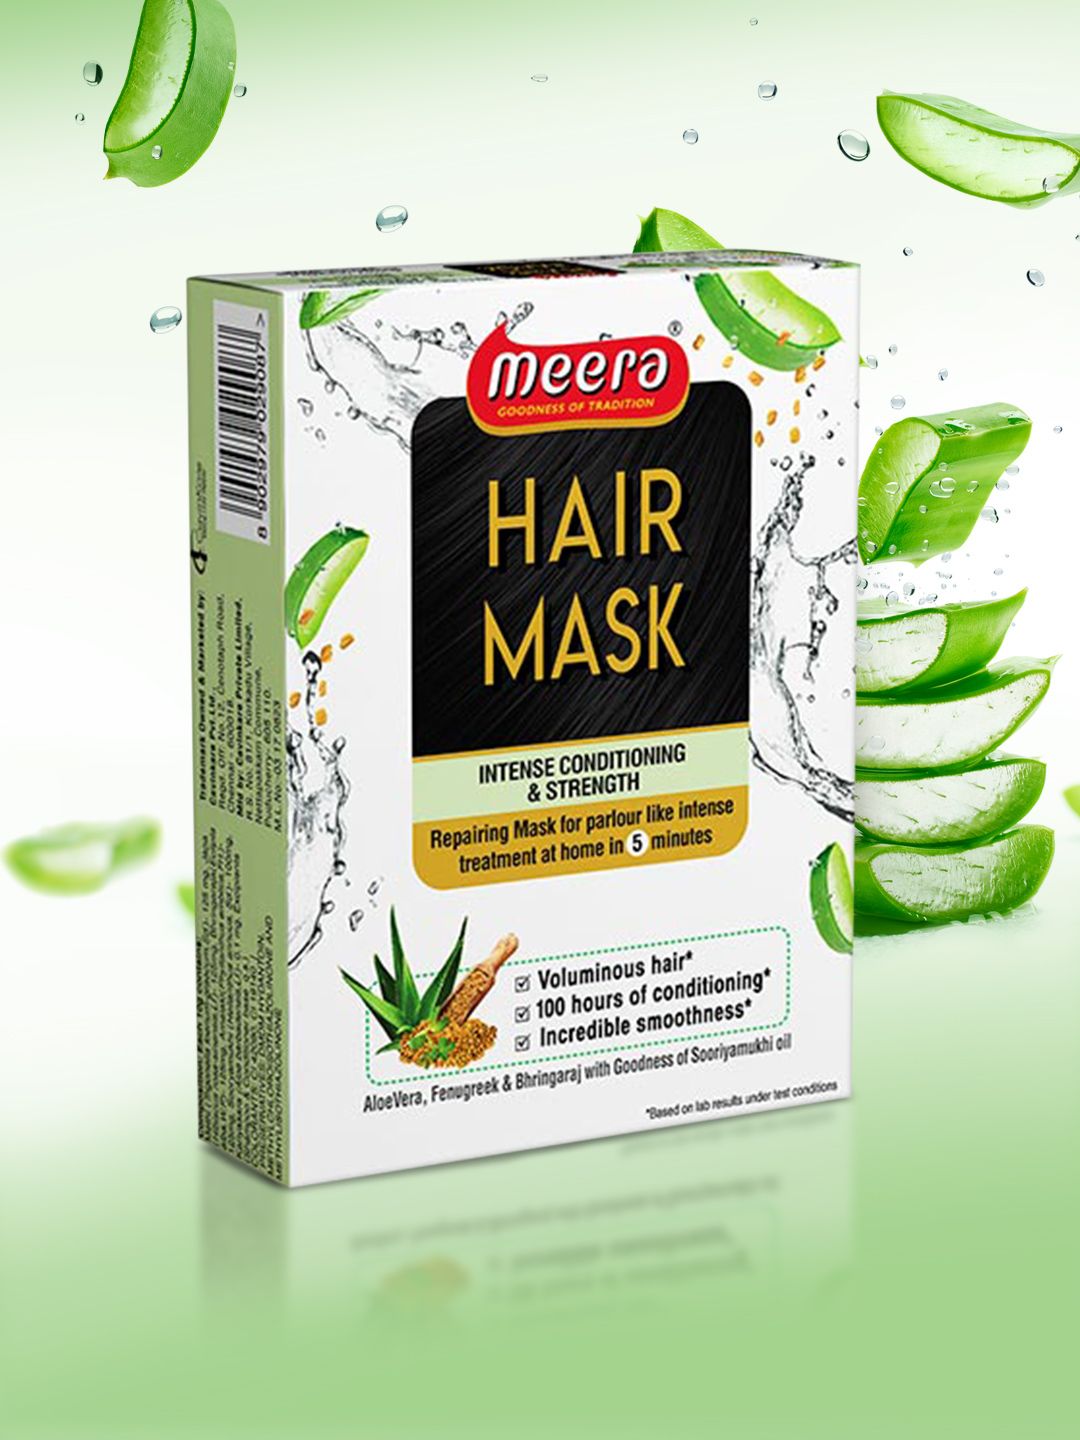 Meera GOODNESS OF TRADITION Hair Mask For Intense Conditioning & Strength-120 g Price in India